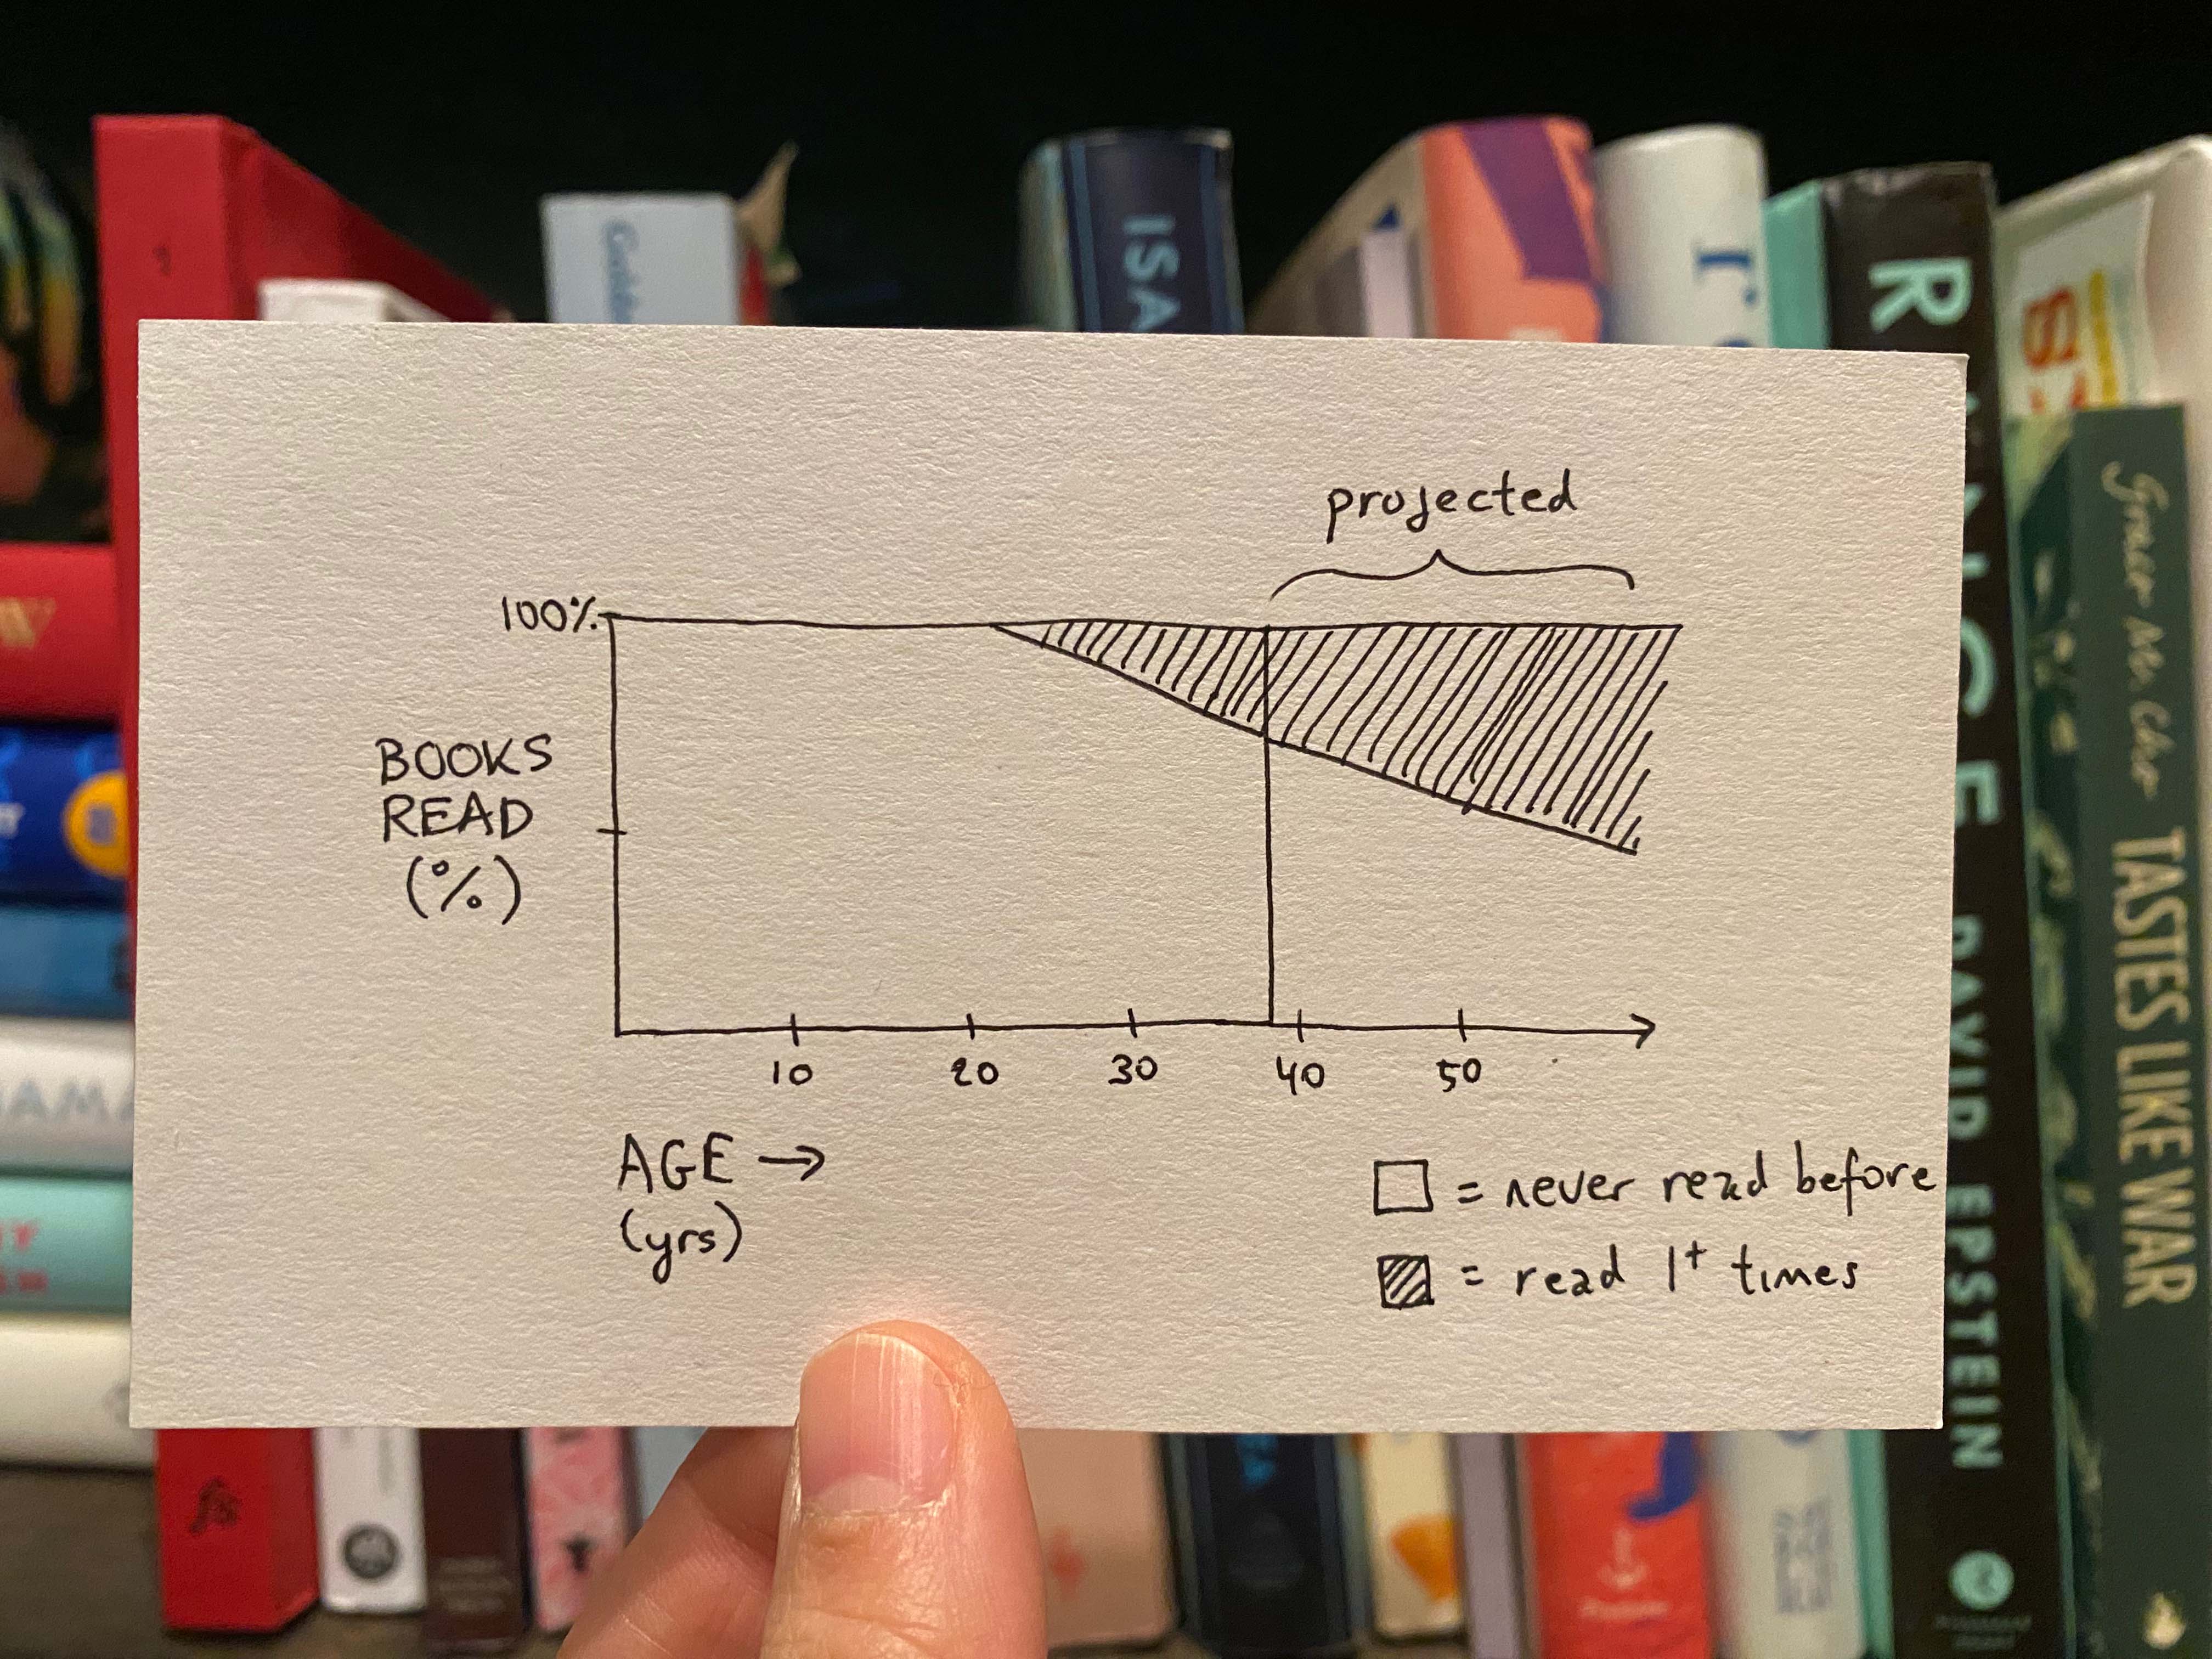 Graph with "Books read (%) on the y axis, age (yrs) on the x axis, with a downward sloping line starting around age 20 with the area below the line corresponding with "Never read before" and the area above the line with "Read 1+ times," indicating that over time, the person is re-reading increasingly more previously-read books